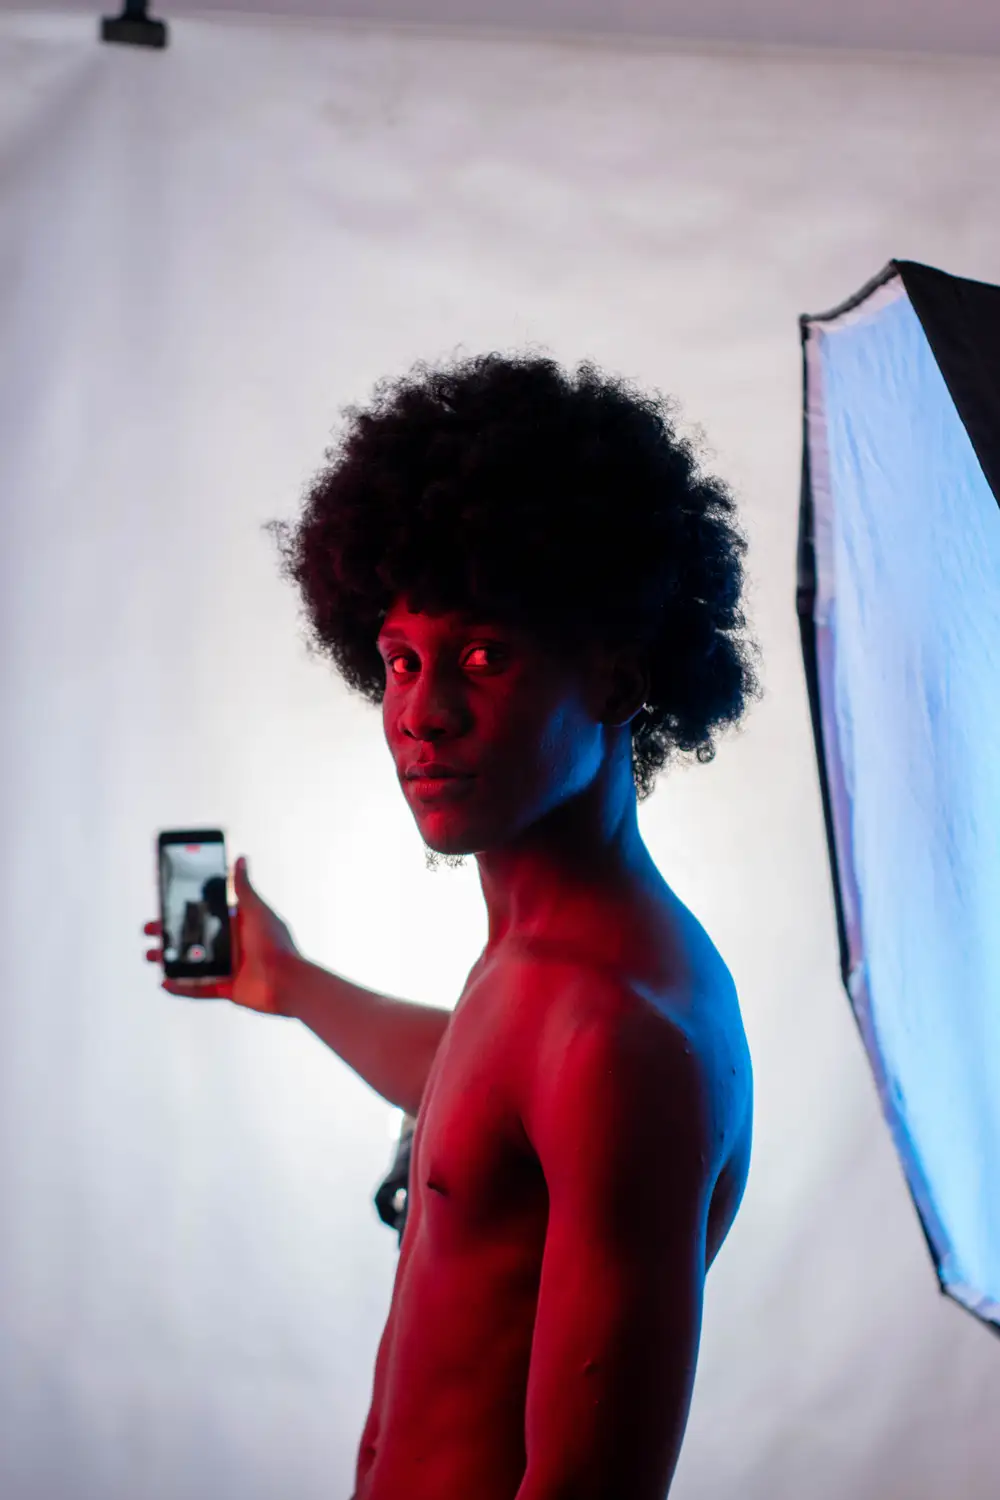 model in afro hairstyle holds his phone for a selfie